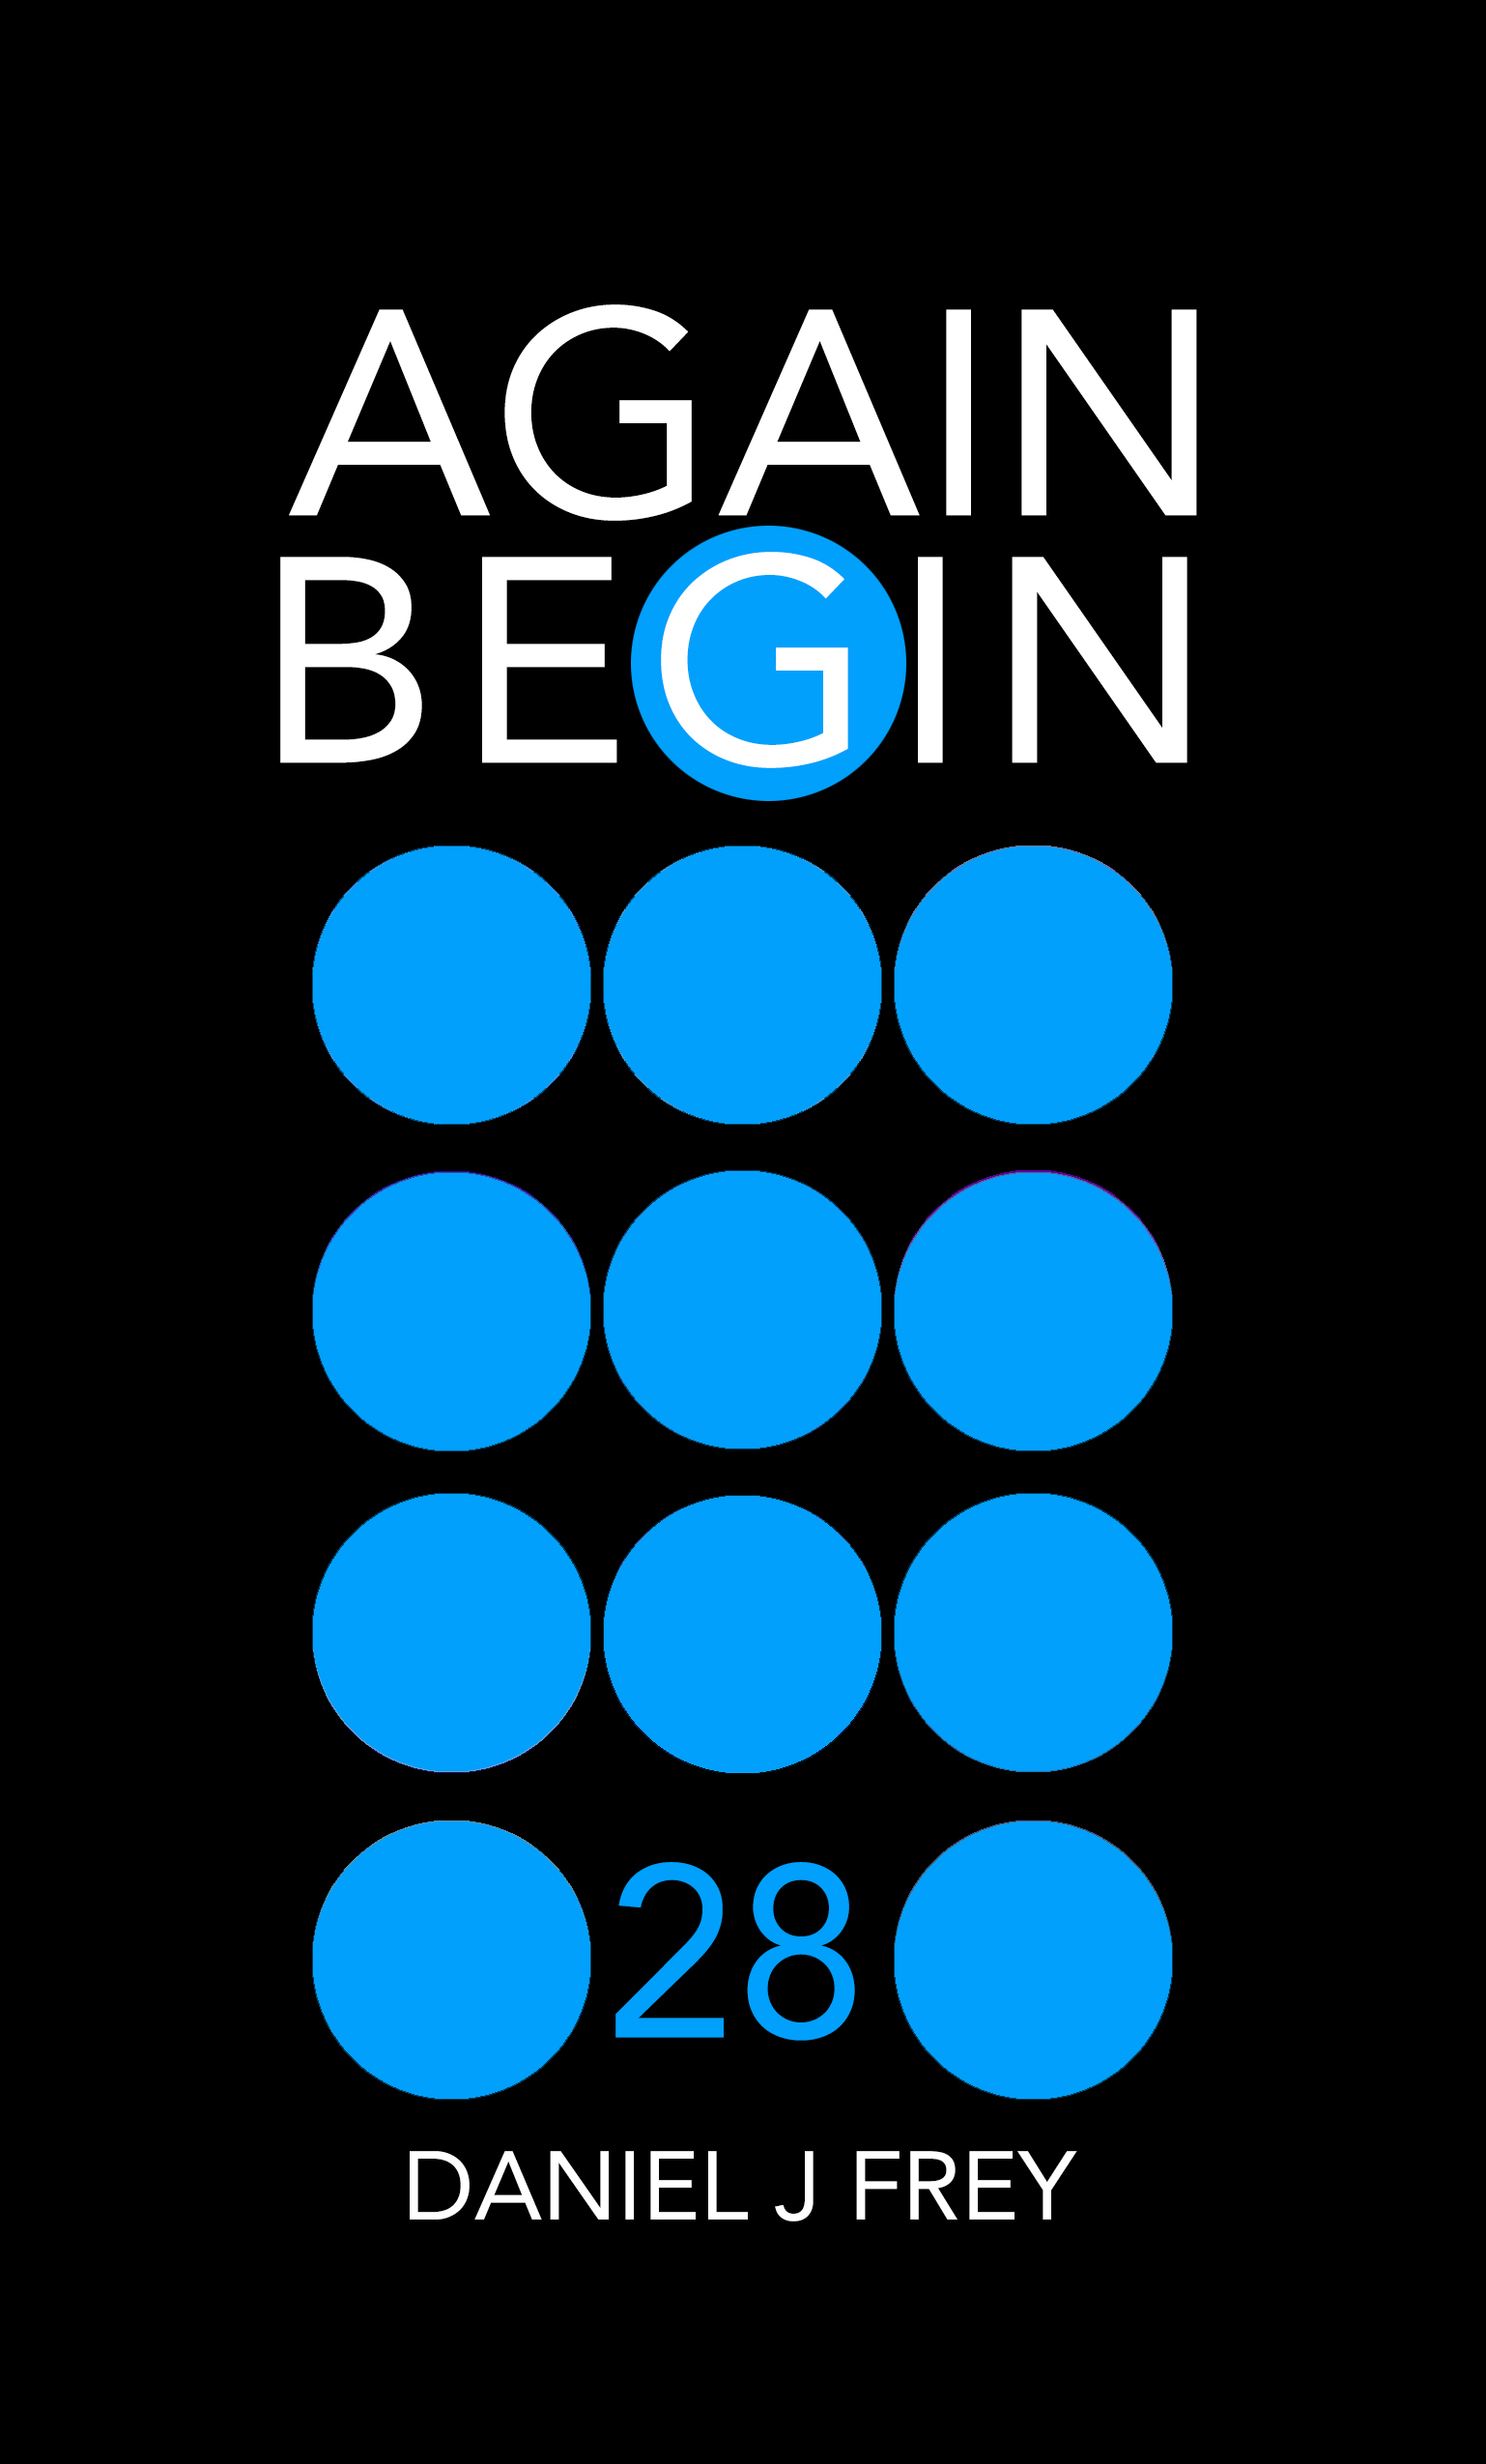 Again Begin 28 - The Impossible Happened